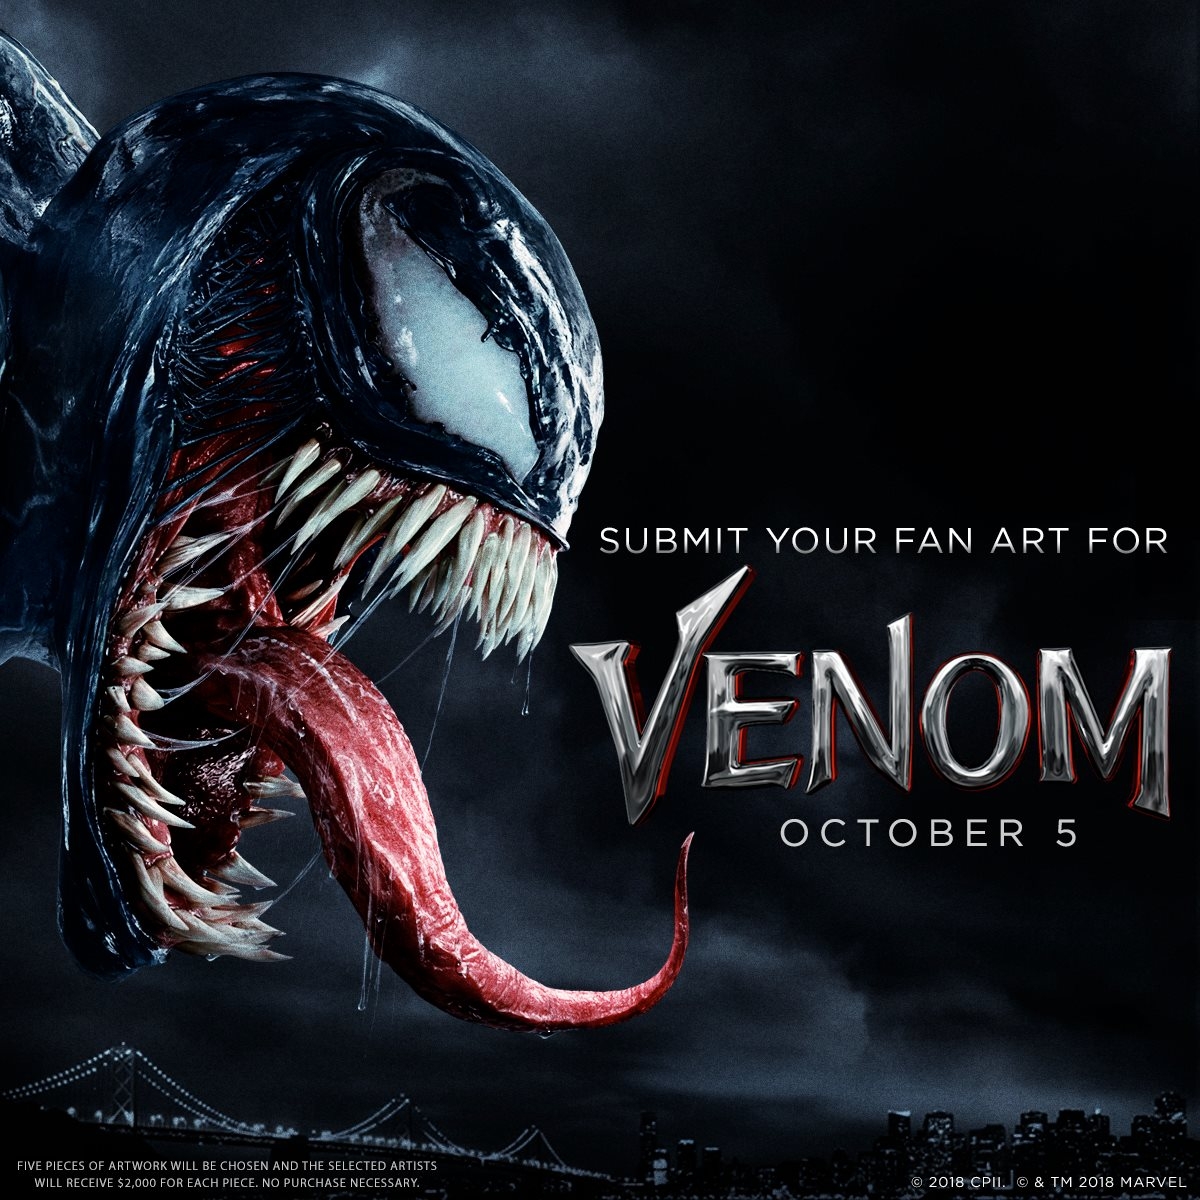 The VENOM MOVIE is call on your FAN ART: